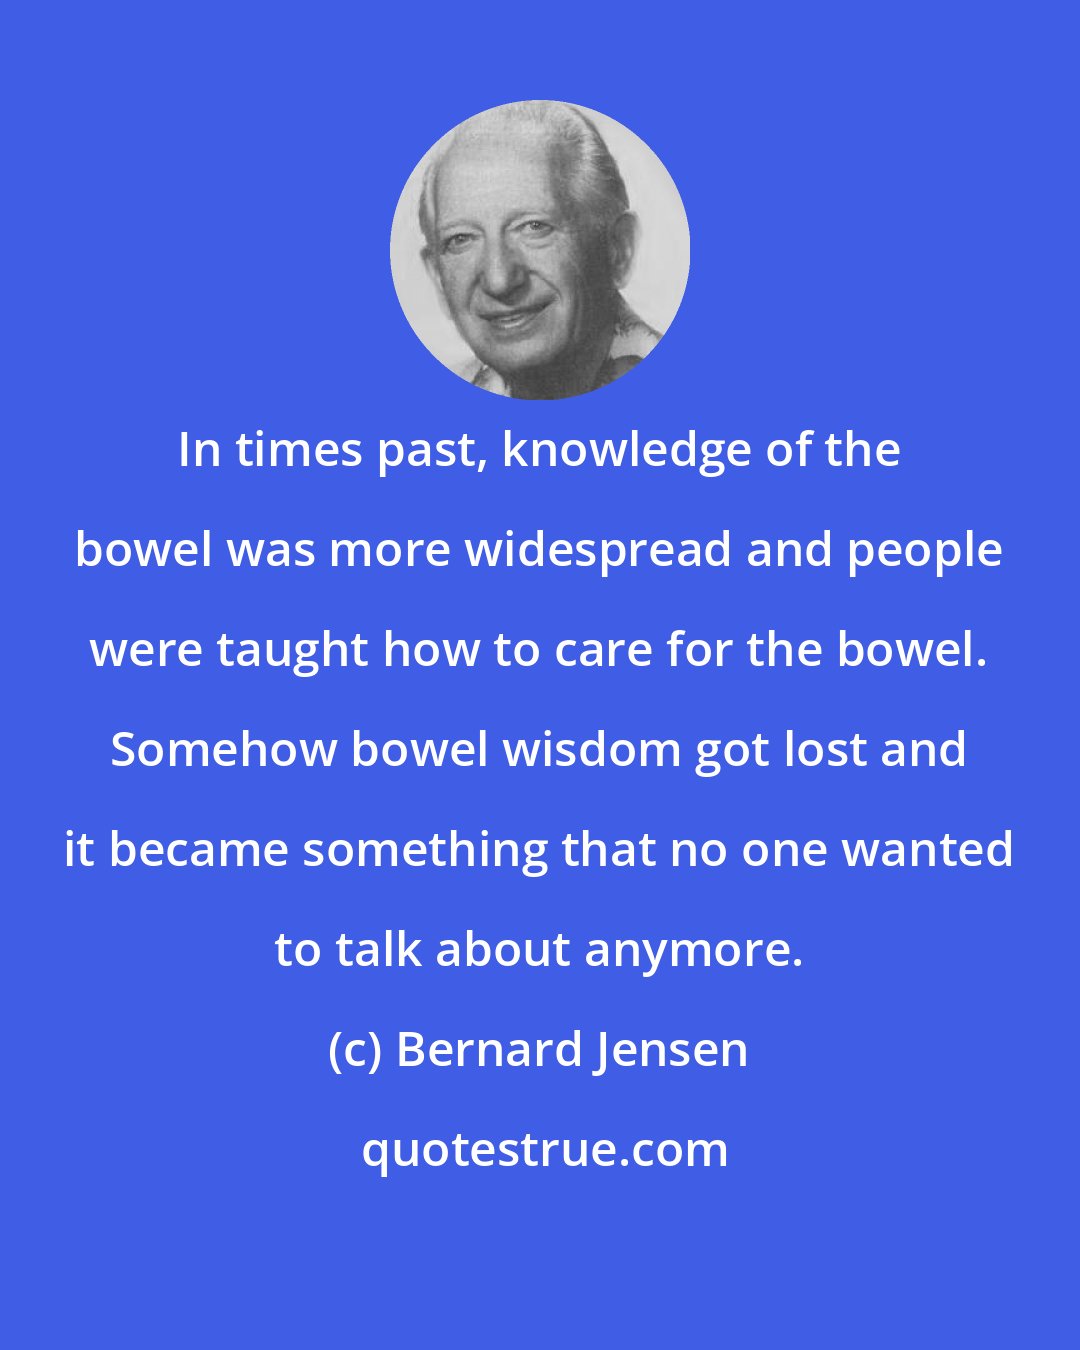 Bernard Jensen: In times past, knowledge of the bowel was more widespread and people were taught how to care for the bowel. Somehow bowel wisdom got lost and it became something that no one wanted to talk about anymore.